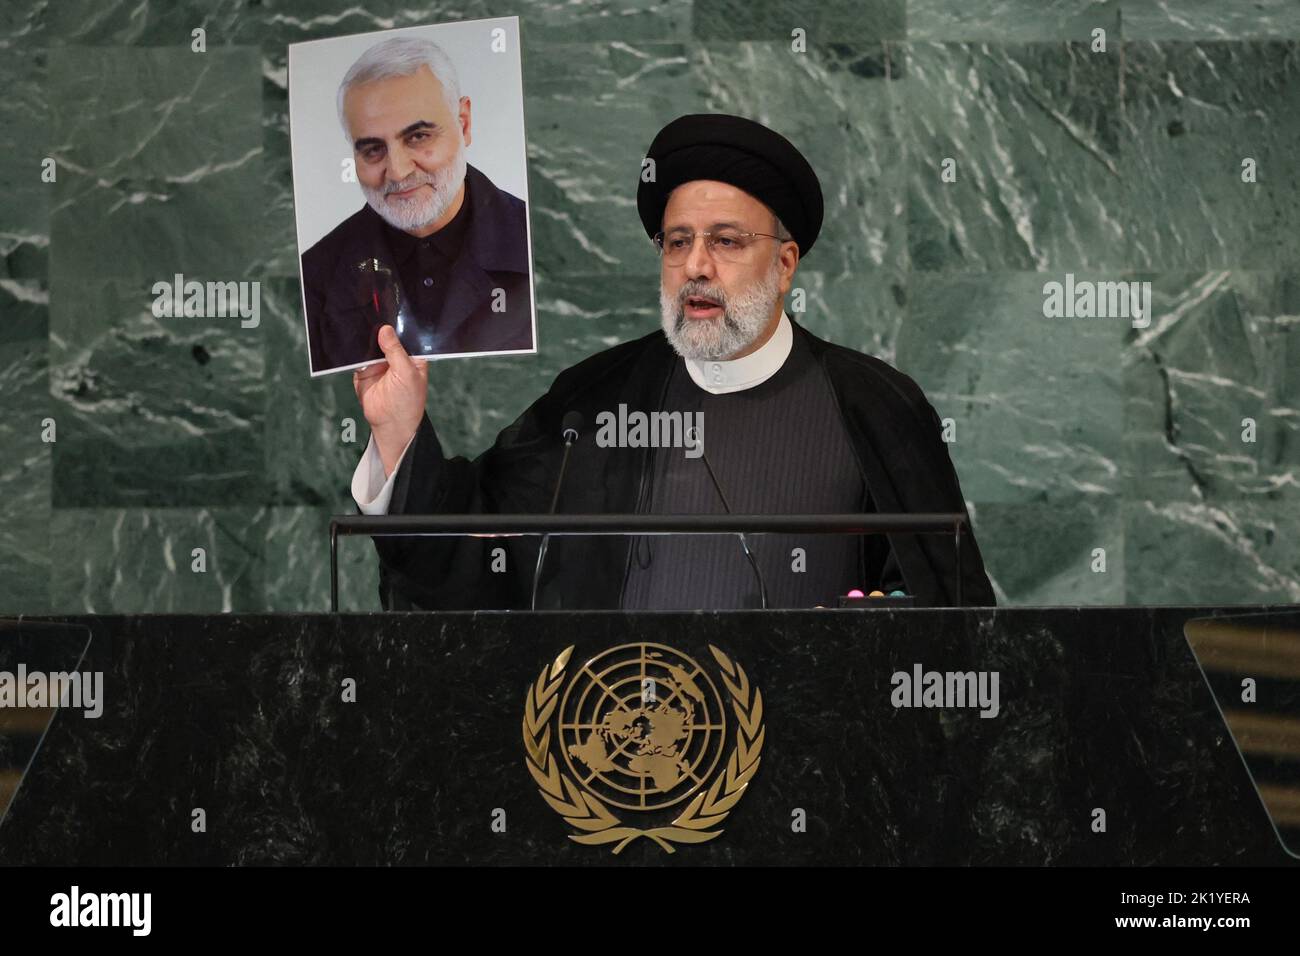 Iran's President Ebrahim Raisi holds up a picture of Quds Force Commander General Qassem Soleimani, who was killed in a U.S. attack, as he addresses the 77th Session of the United Nations General Assembly at U.N. Headquarters in New York City, U.S., September 21, 2022. REUTERS/Brendan Mcdermid Stock Photo